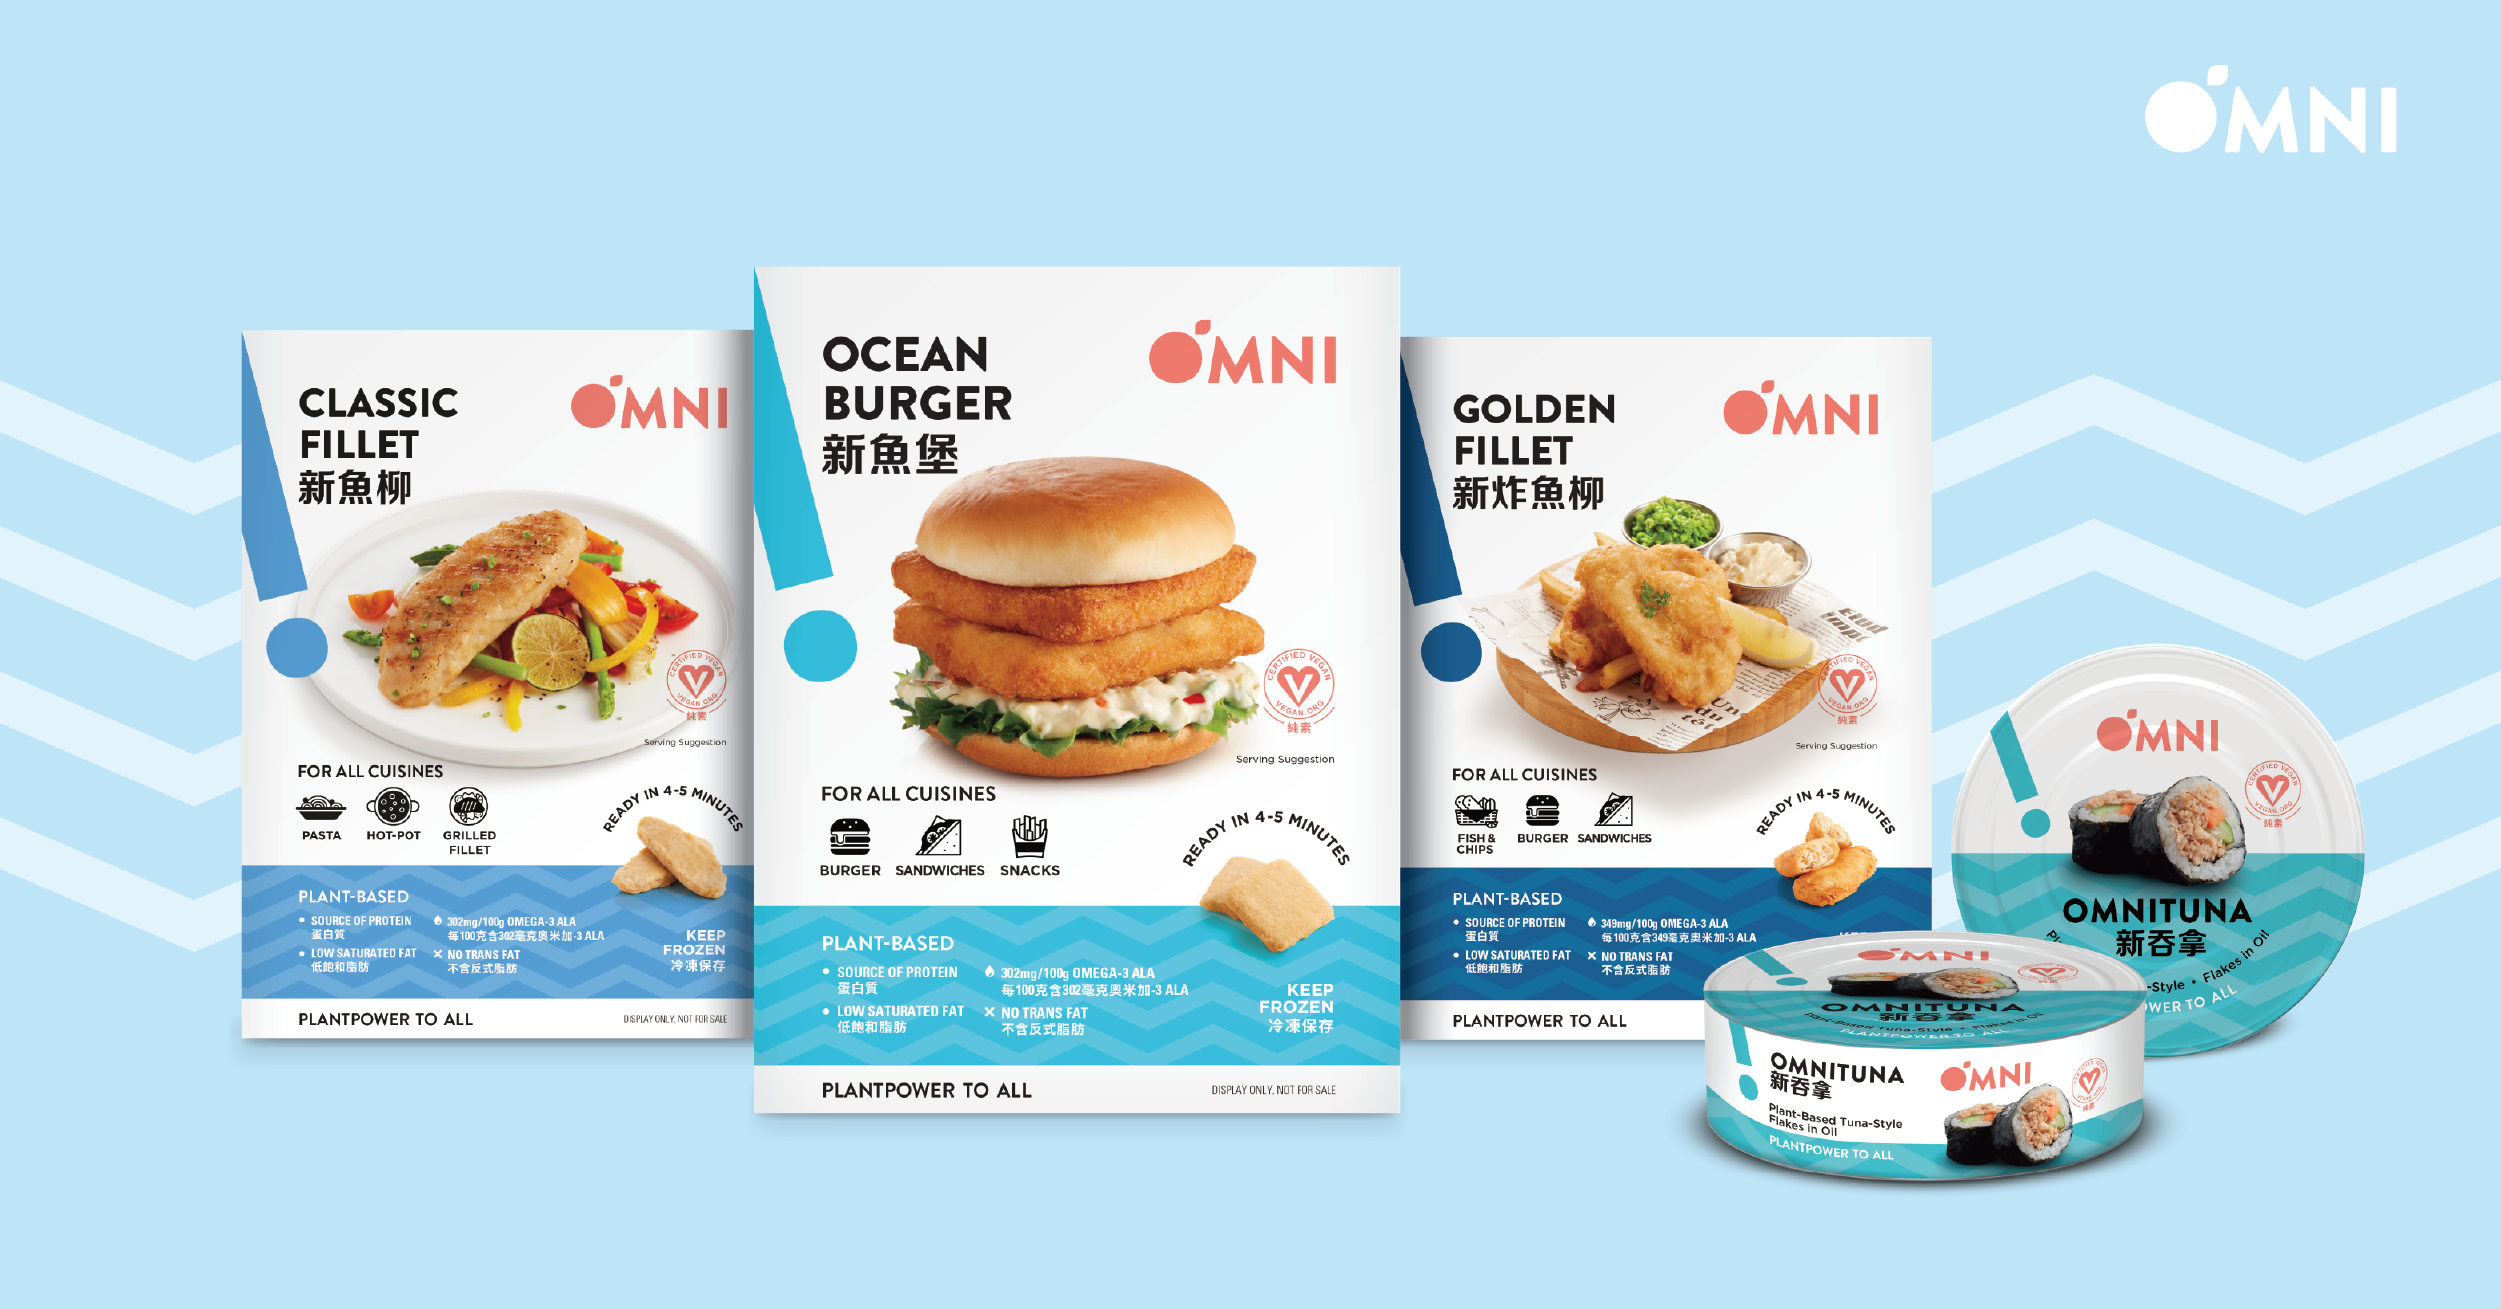 OmniFoods Launches Plant-based Seafood Line After Alternative Pork Success